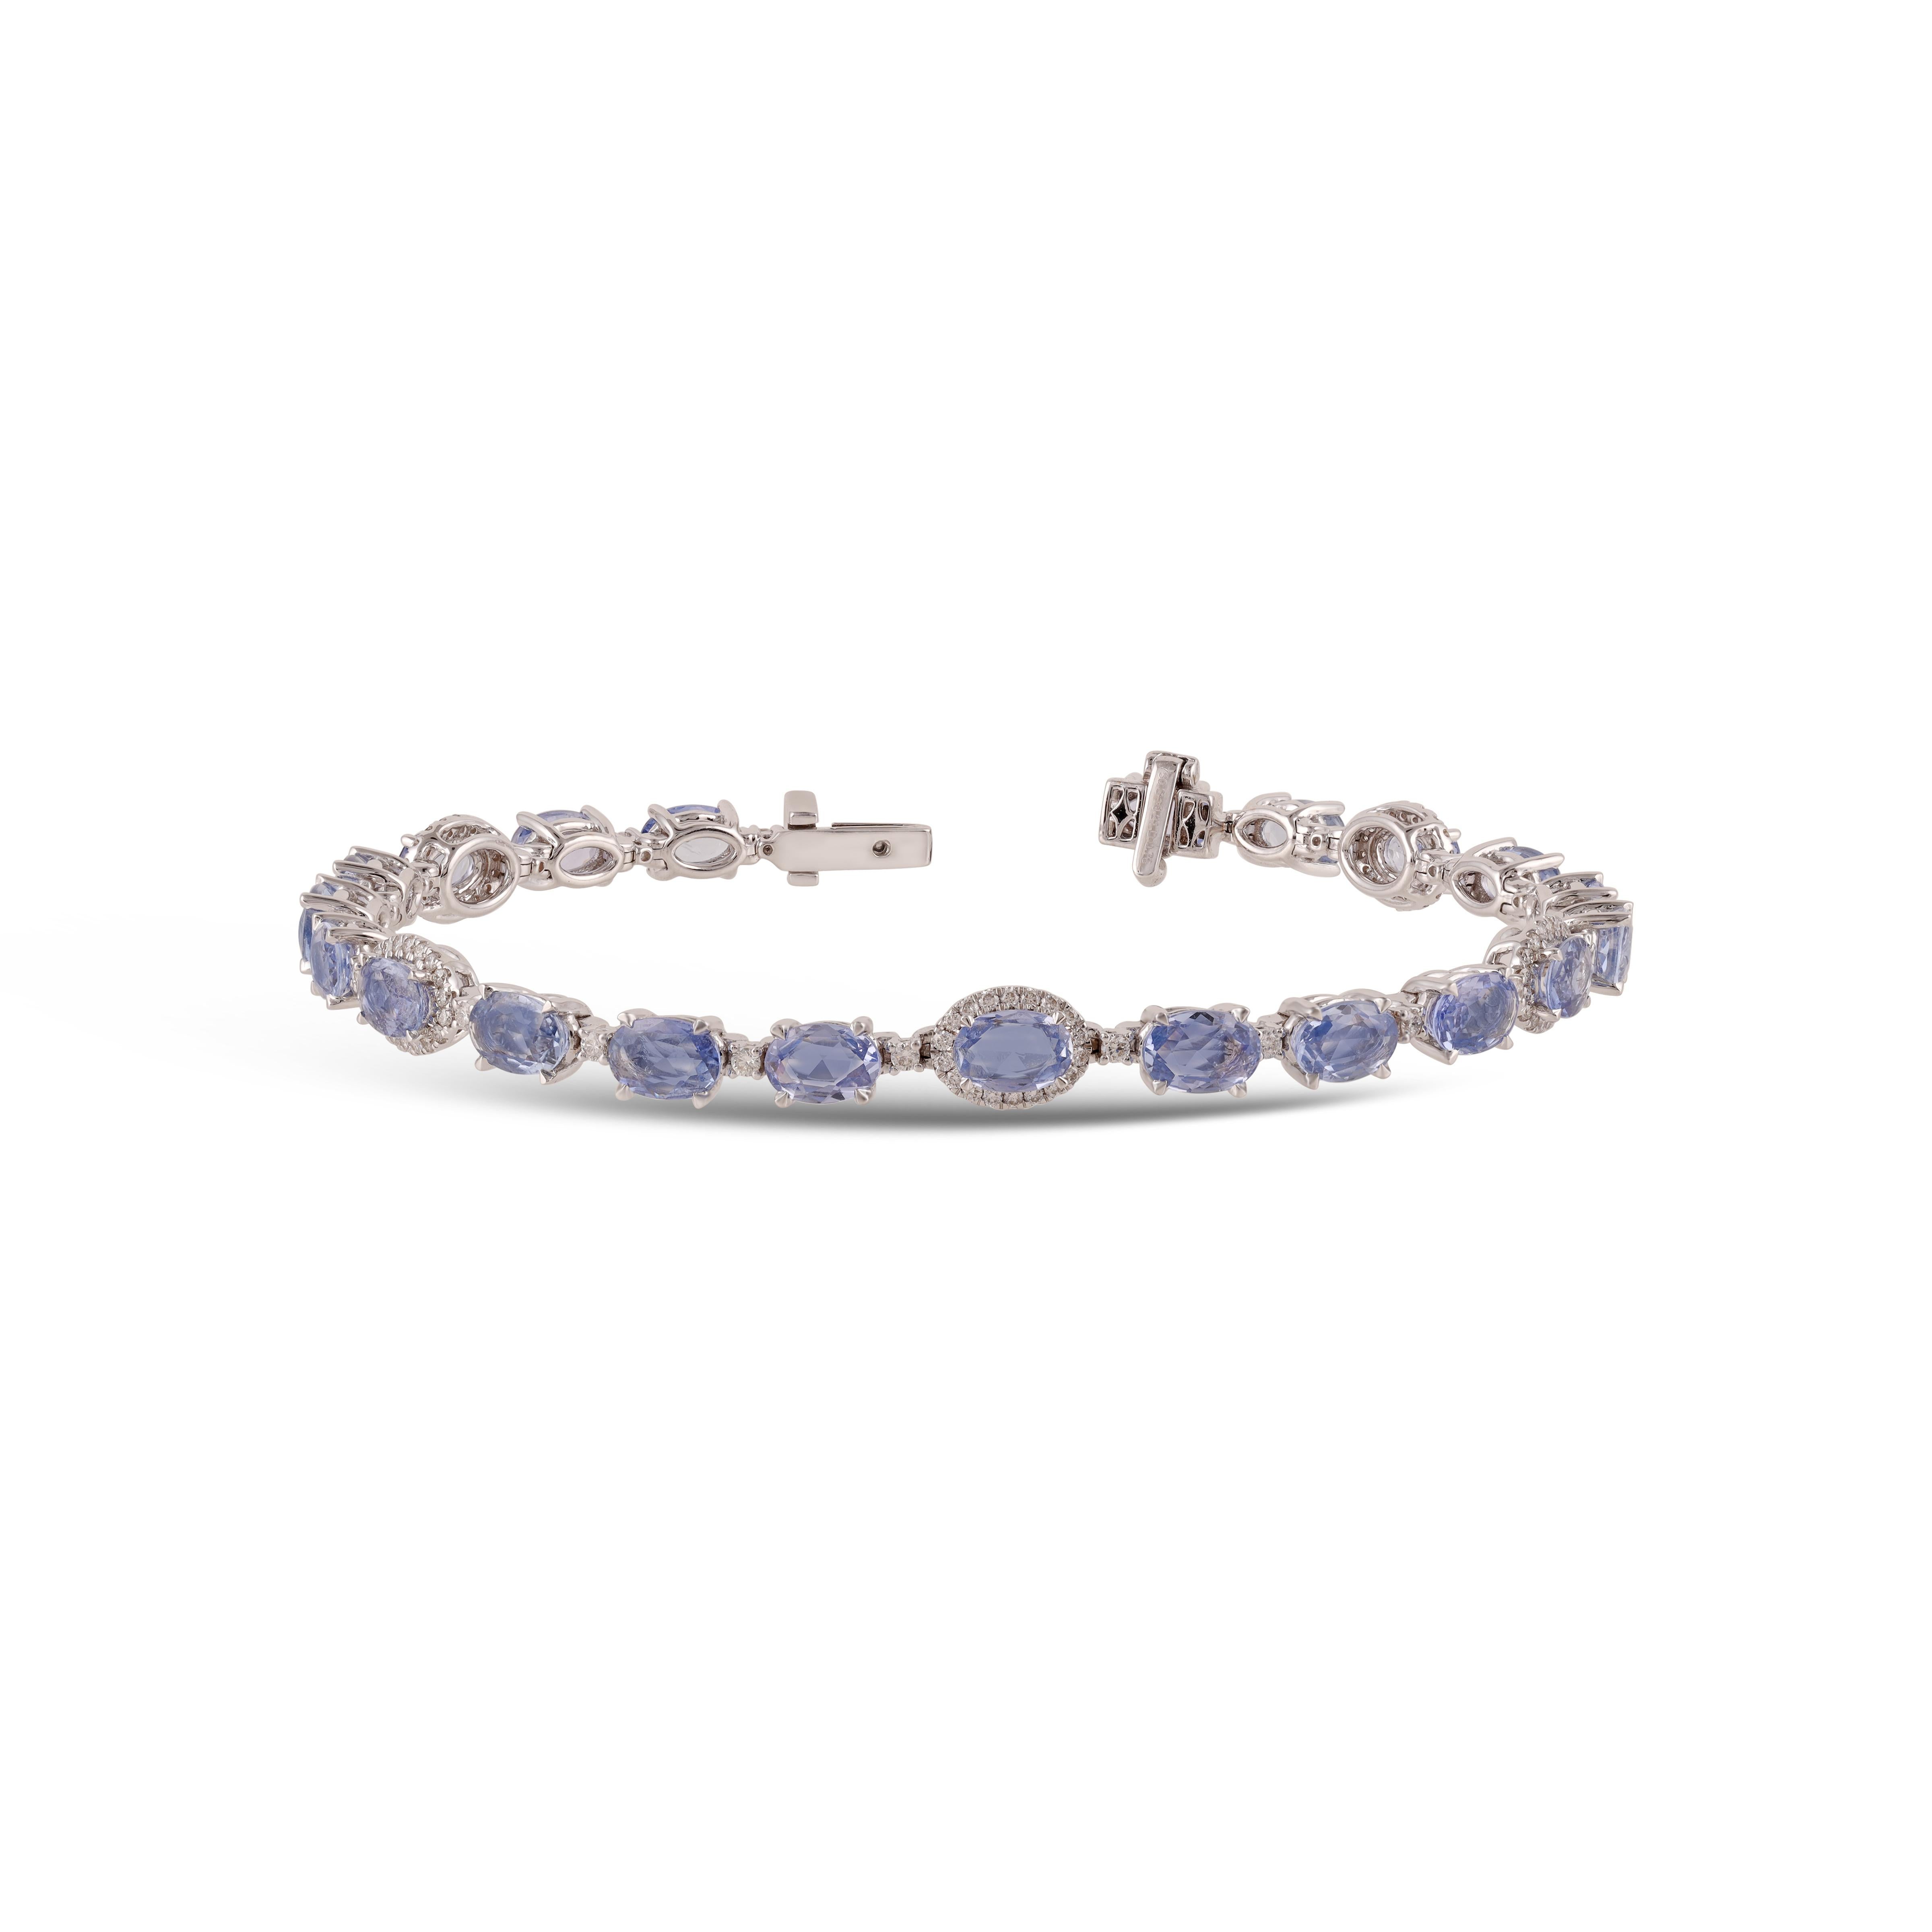 10.21 Carat Sapphire and Diamond Bracelet in 18k Gold

This magnificent Oval shape sapphire tennis bracelet is incredulous. The solitaire Oval-shaped Oval-cut sapphires are beautifully With Single  Diamonds making the bracelet more graceful and